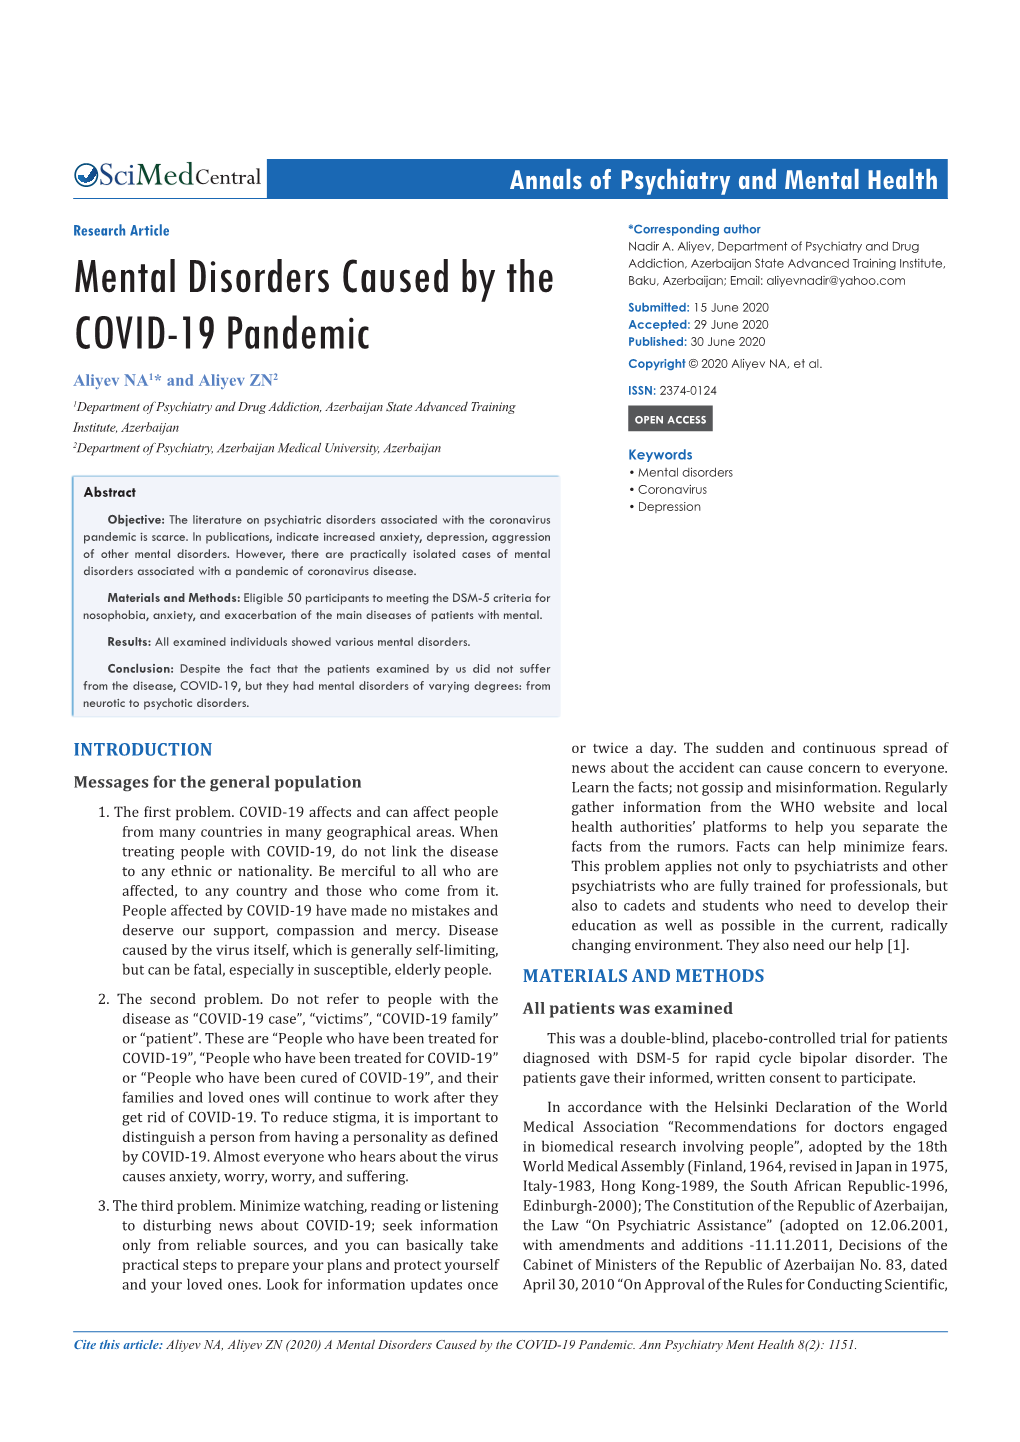 Mental Disorders Caused by the COVID-19 Pandemic